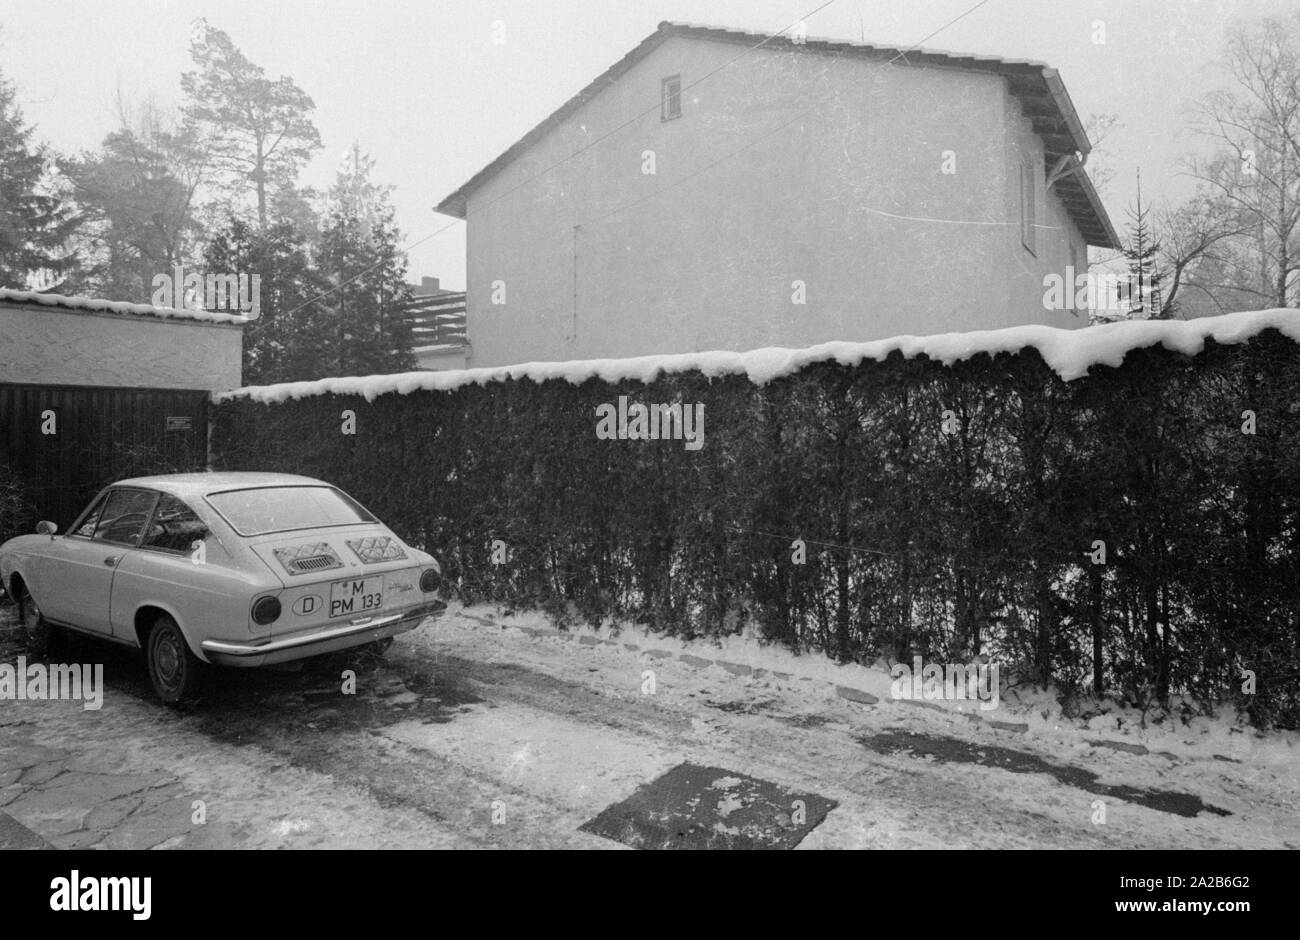 A Fiat 850 Coupe is in the driveway of a garage. In the background is a residential house. The car belongs to the photographer Alfred Strobel. Stock Photo